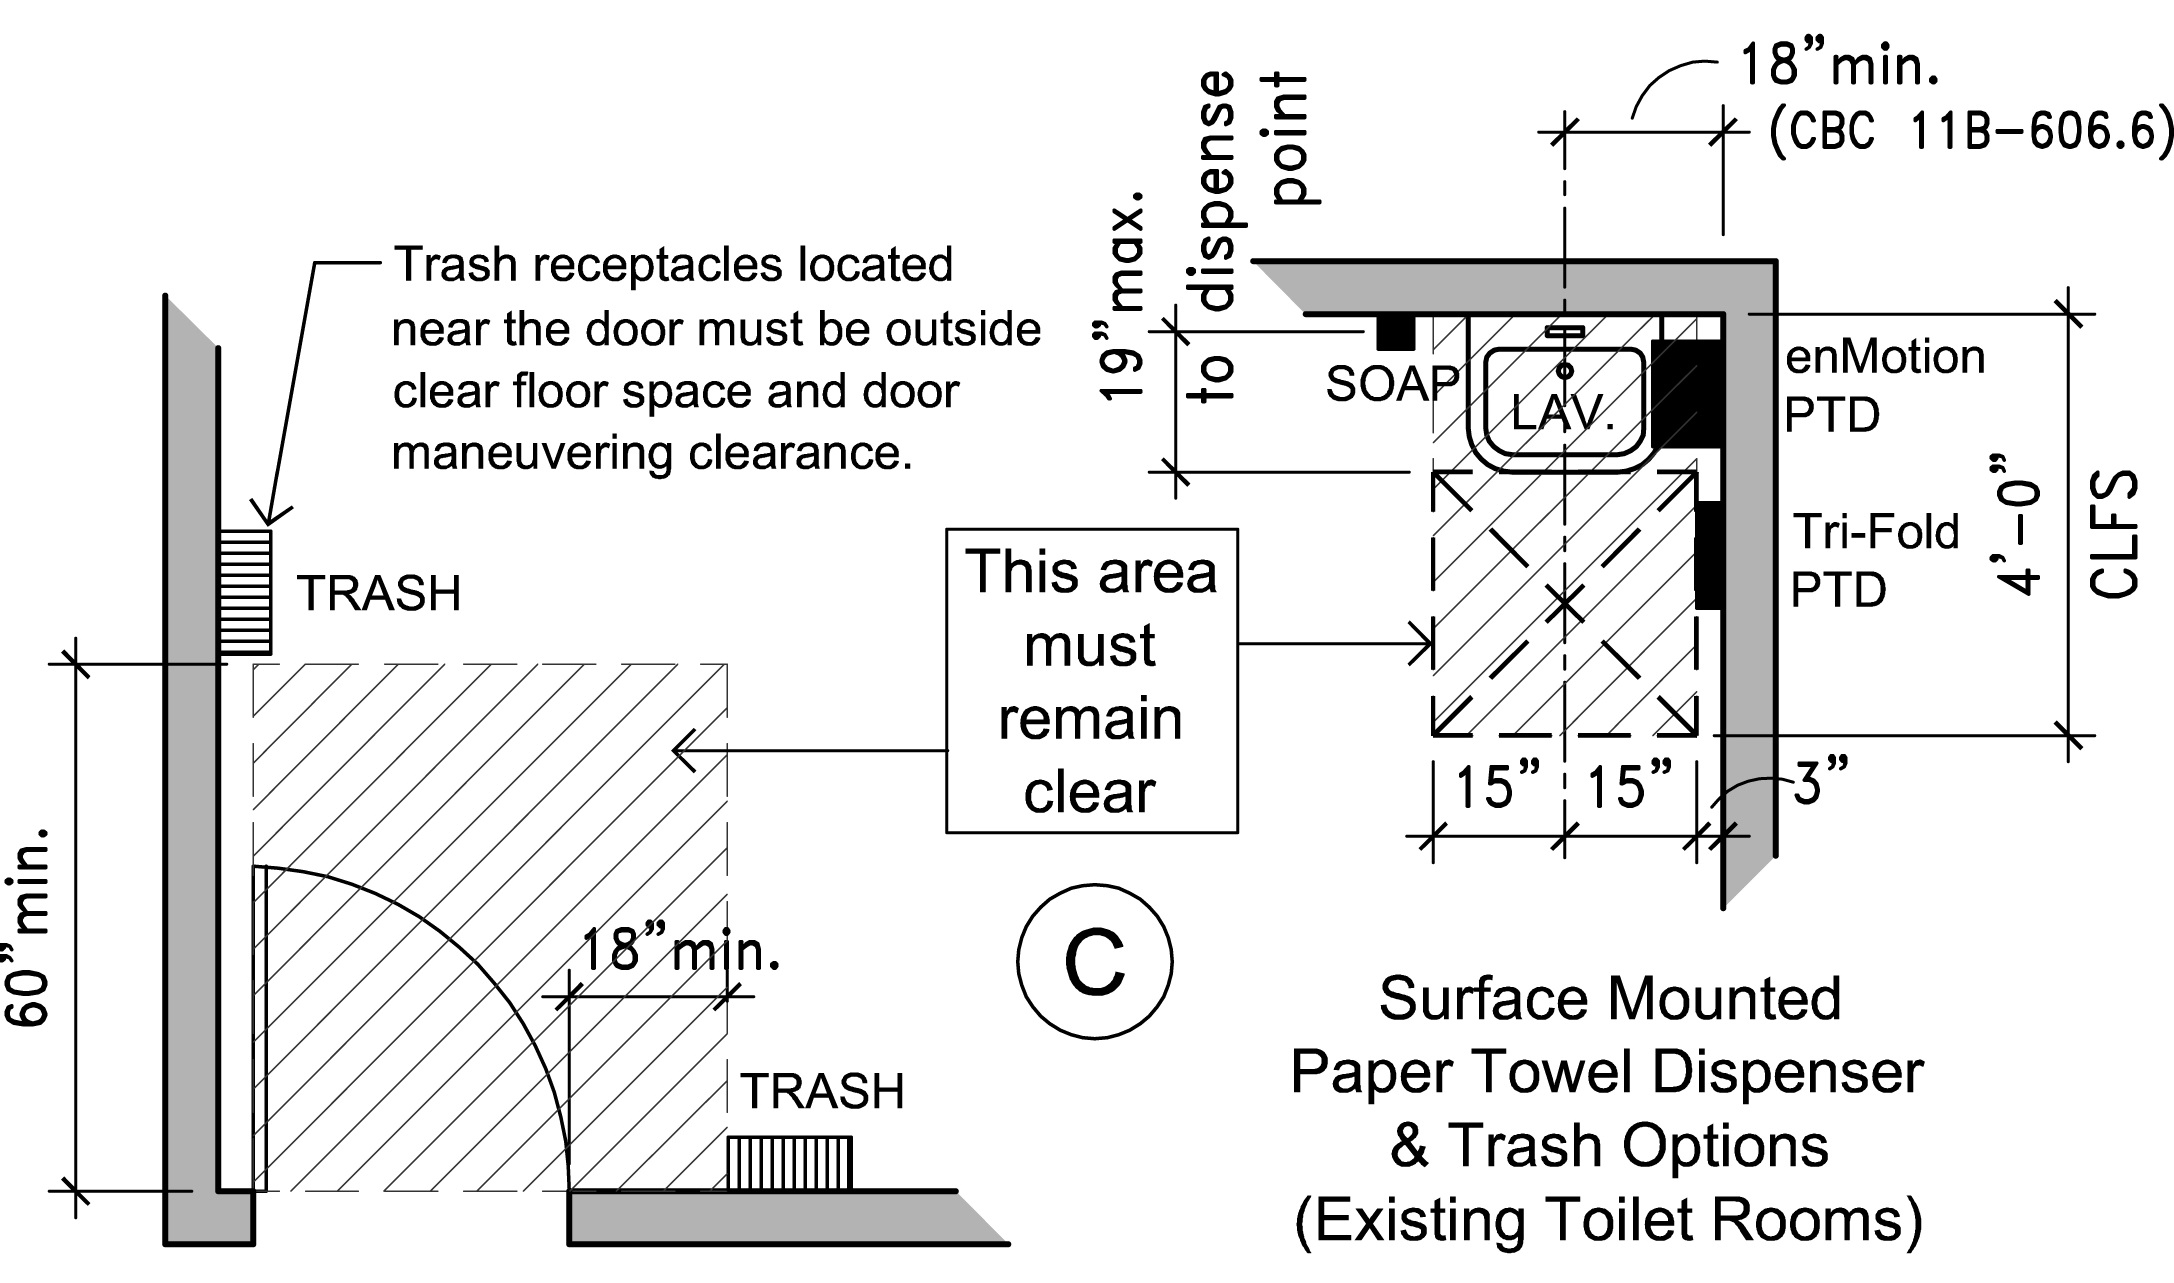 Architectural drawing showing lavatory and accessory layout and door maneuvering clearance with dispenser and trash can placement, including dimensions